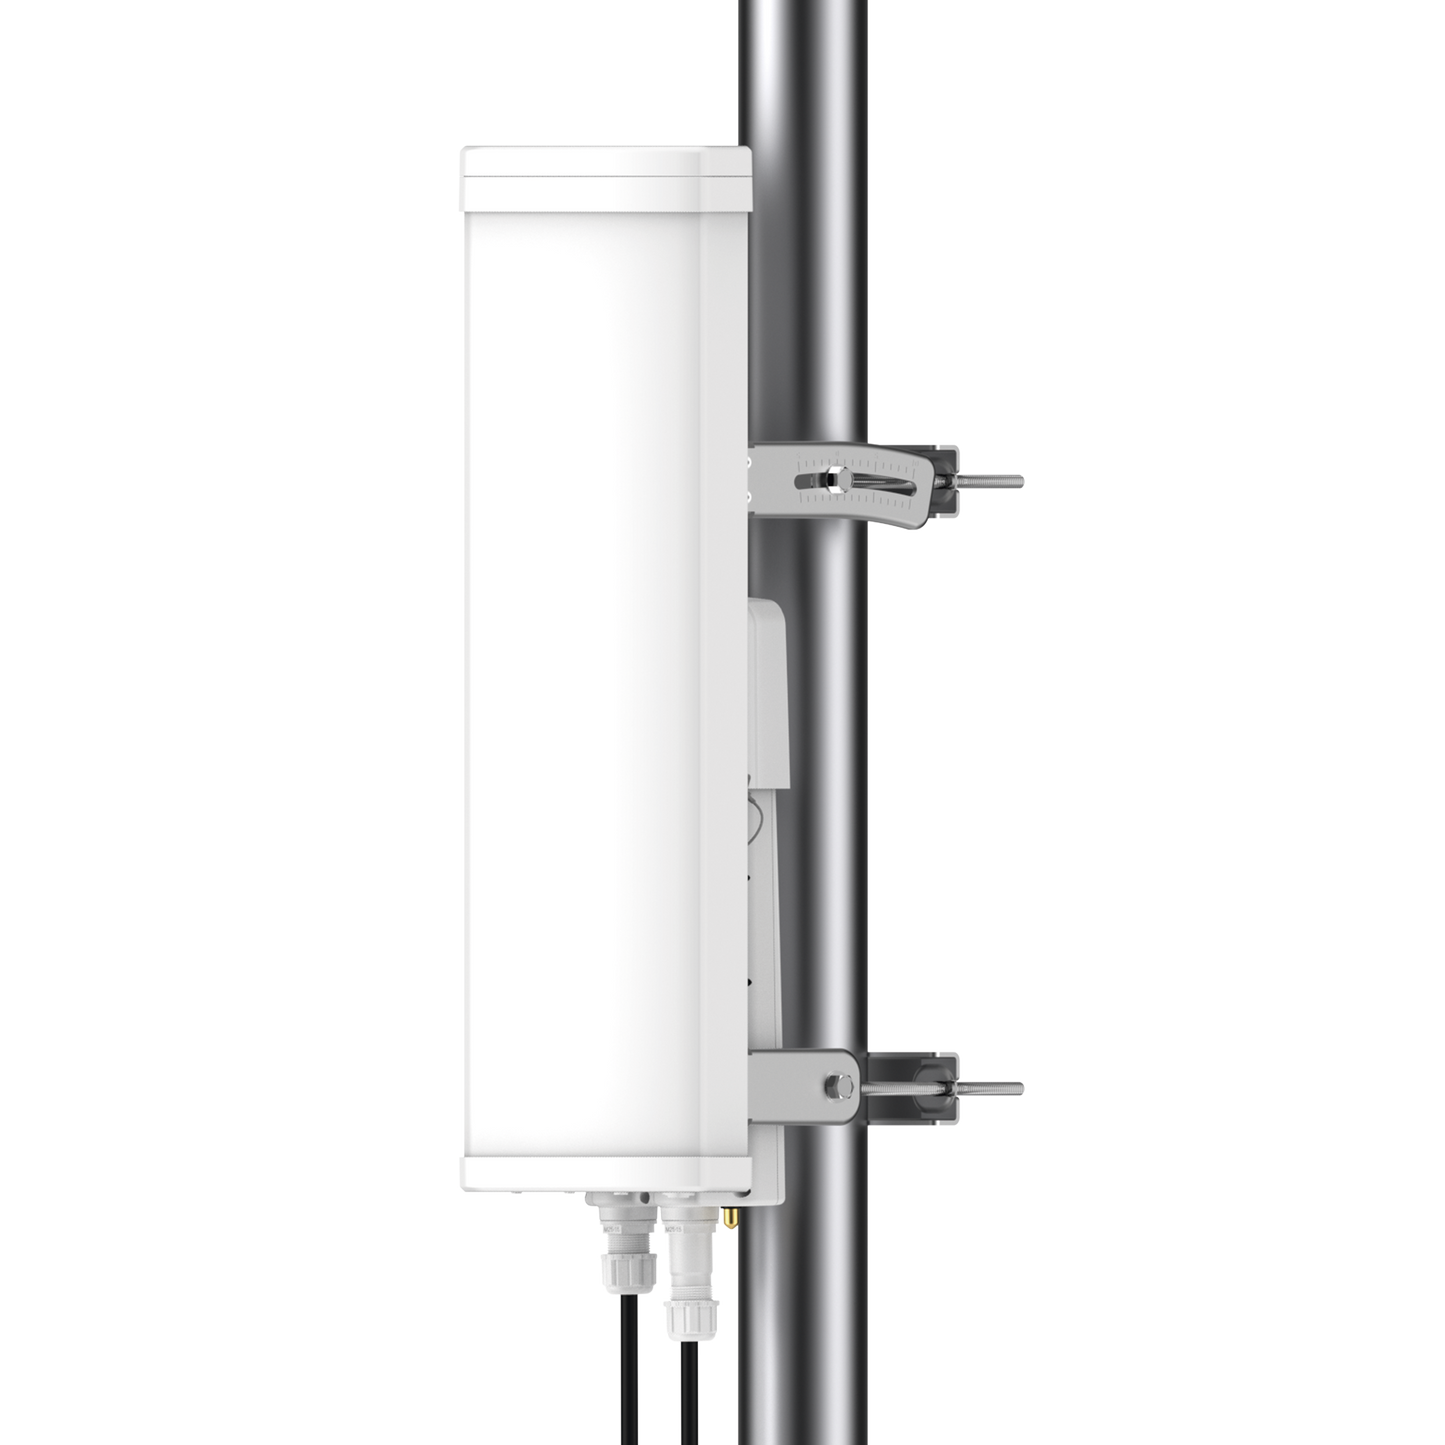 90 Degree Sector Antenna, 18 dBi, 5.9-7.1 GHz, 4x4 MU-MIMO, includes mounting kit for EPMP4600